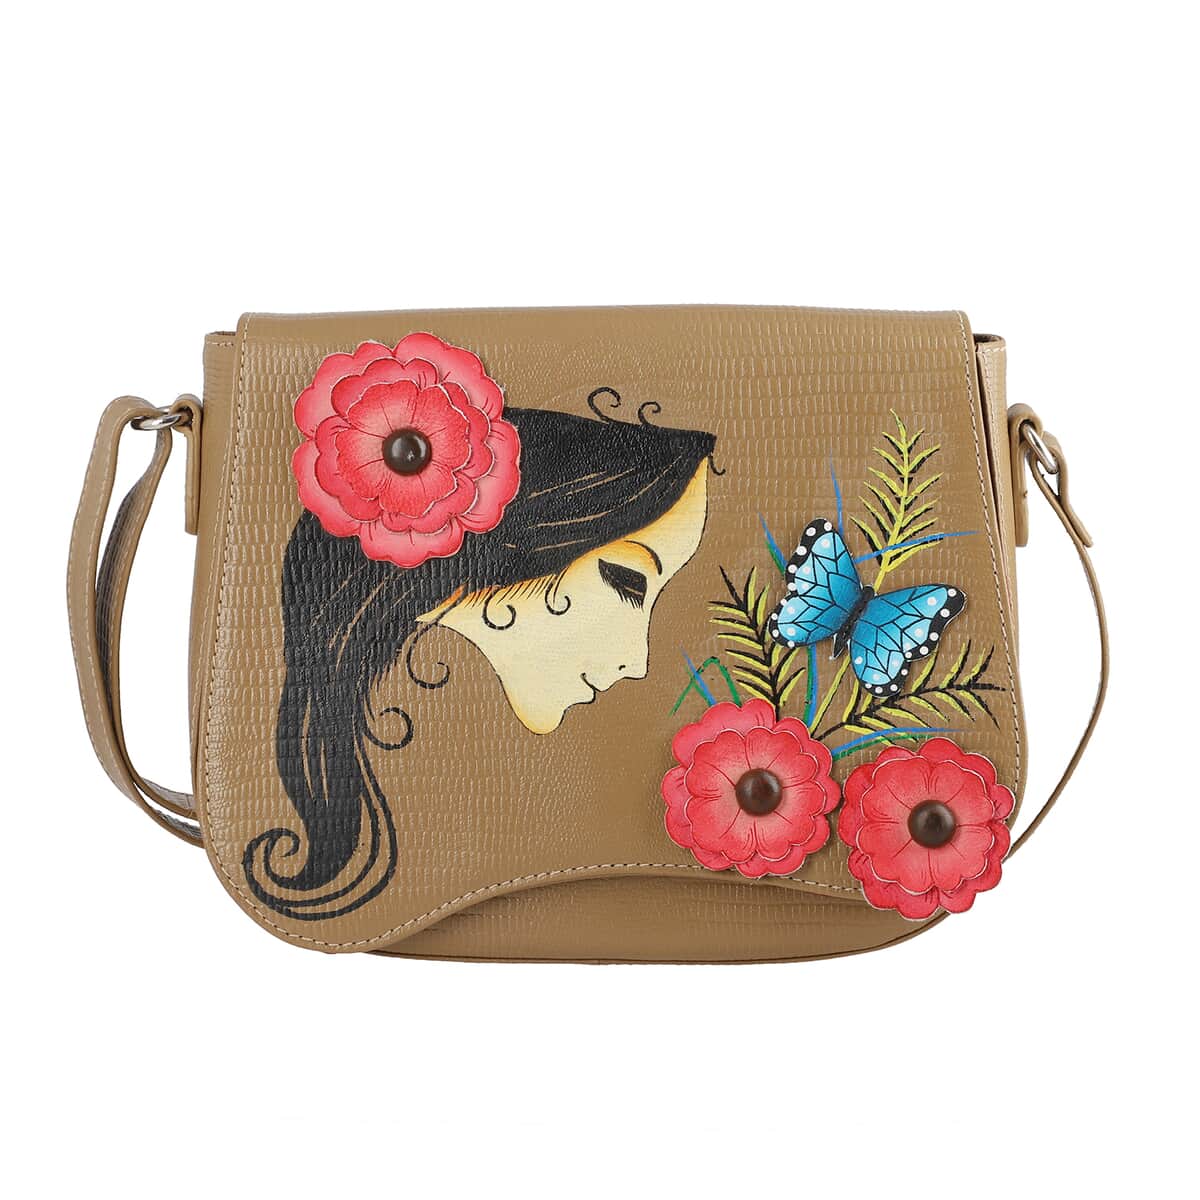 "SUKRITI 100% Genuine Leather Applique Crossbody Bag Theme: Floral Girl  Color: Dark Beige Size: 10 x 3 x 8.5 inches" image number 0